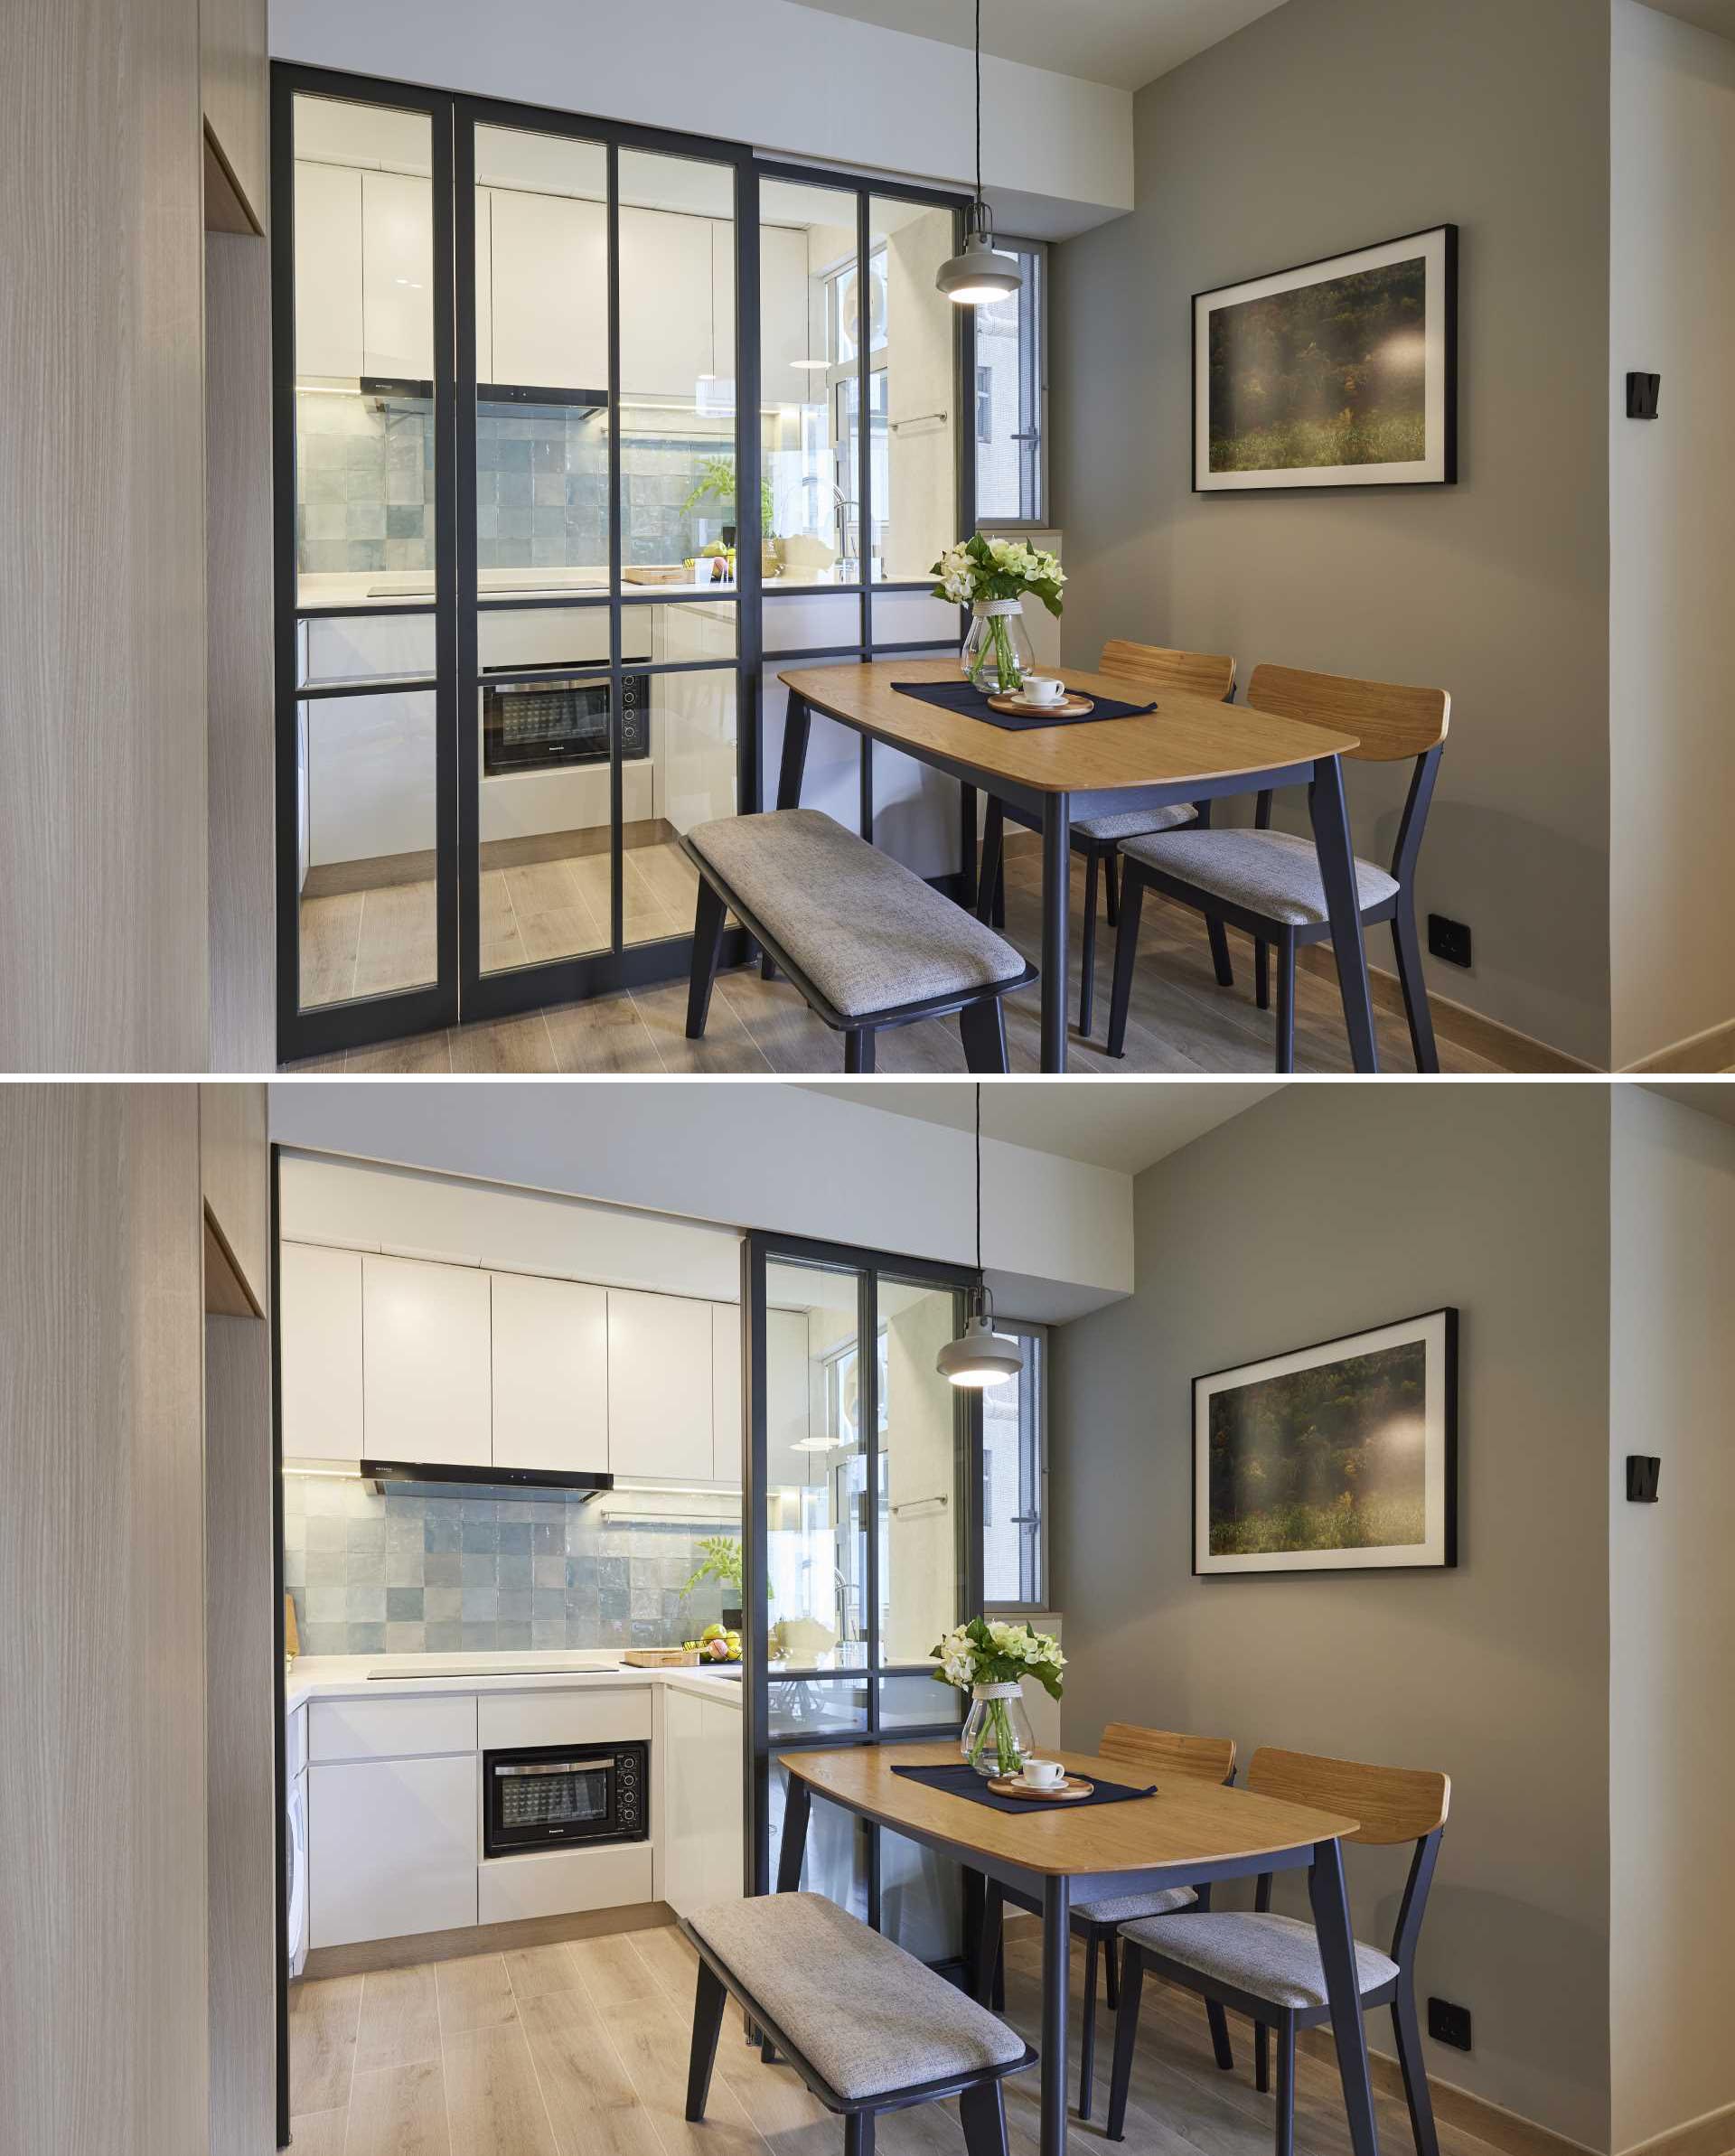 A charcoal-grey metal frame glass sliding door separates kitchen from the dining room, and allows light to flow between the spaces. 